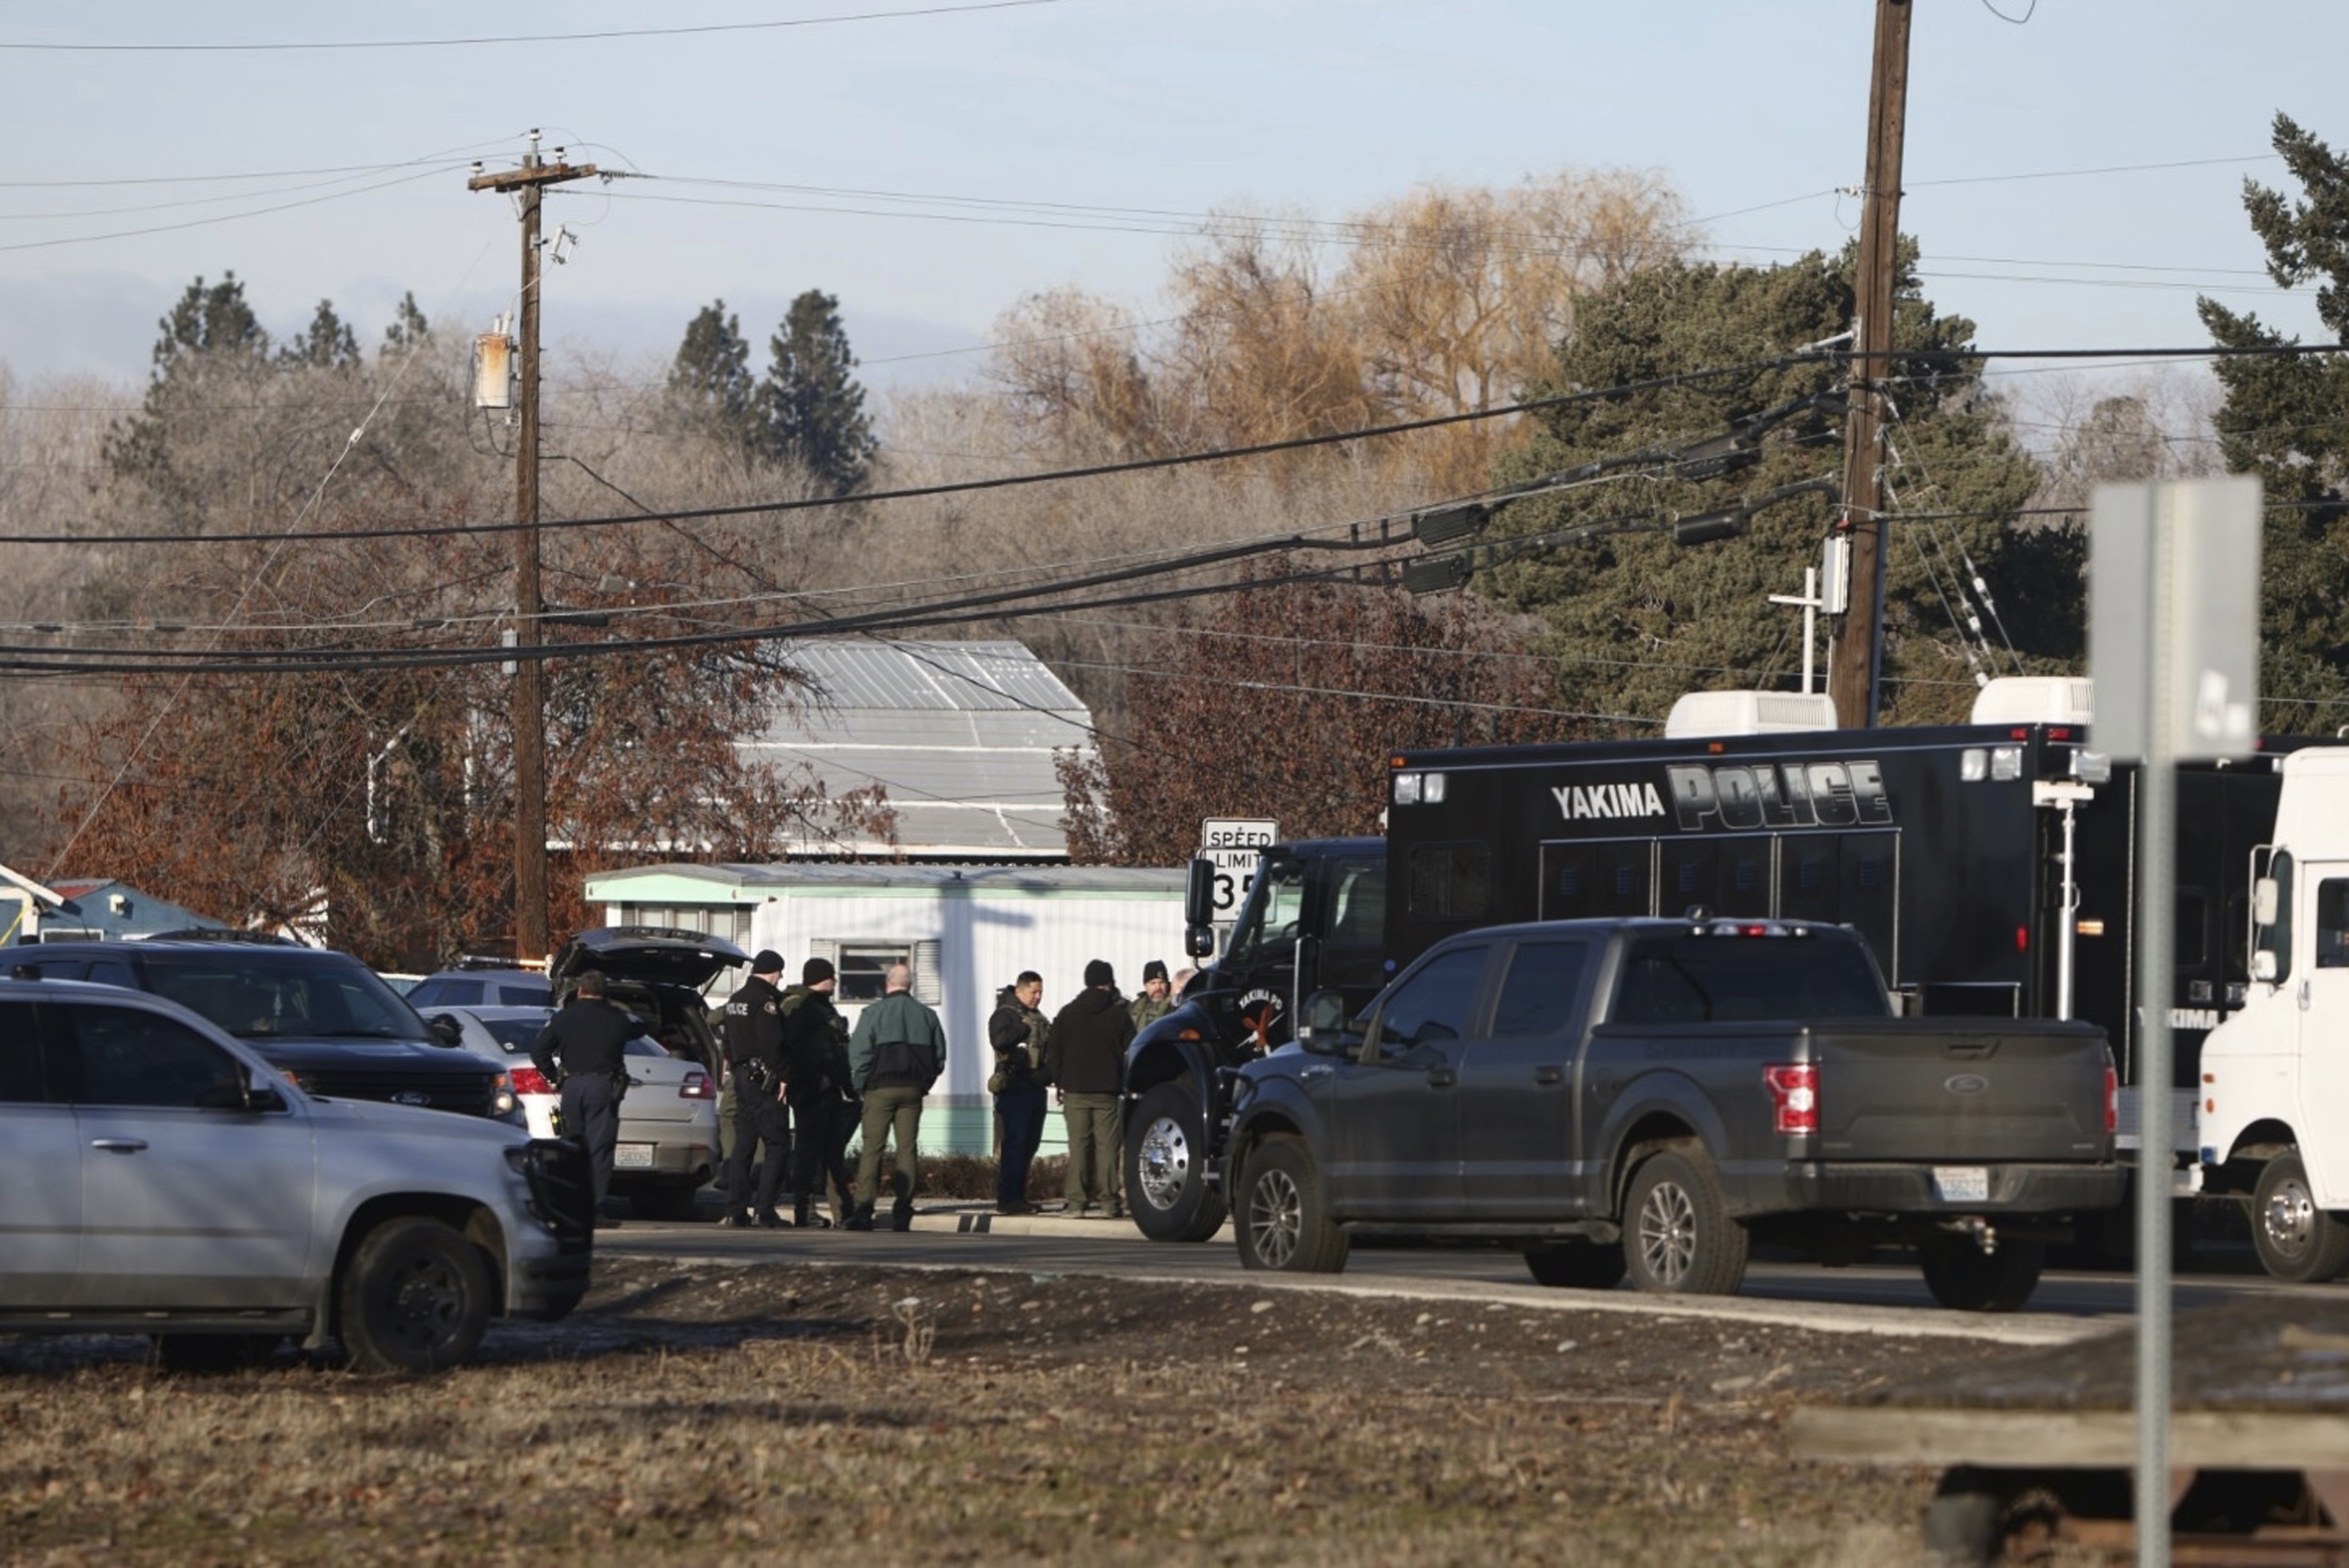 The Police surrounded the area to advance with the investigation and find the fugitive (AP)